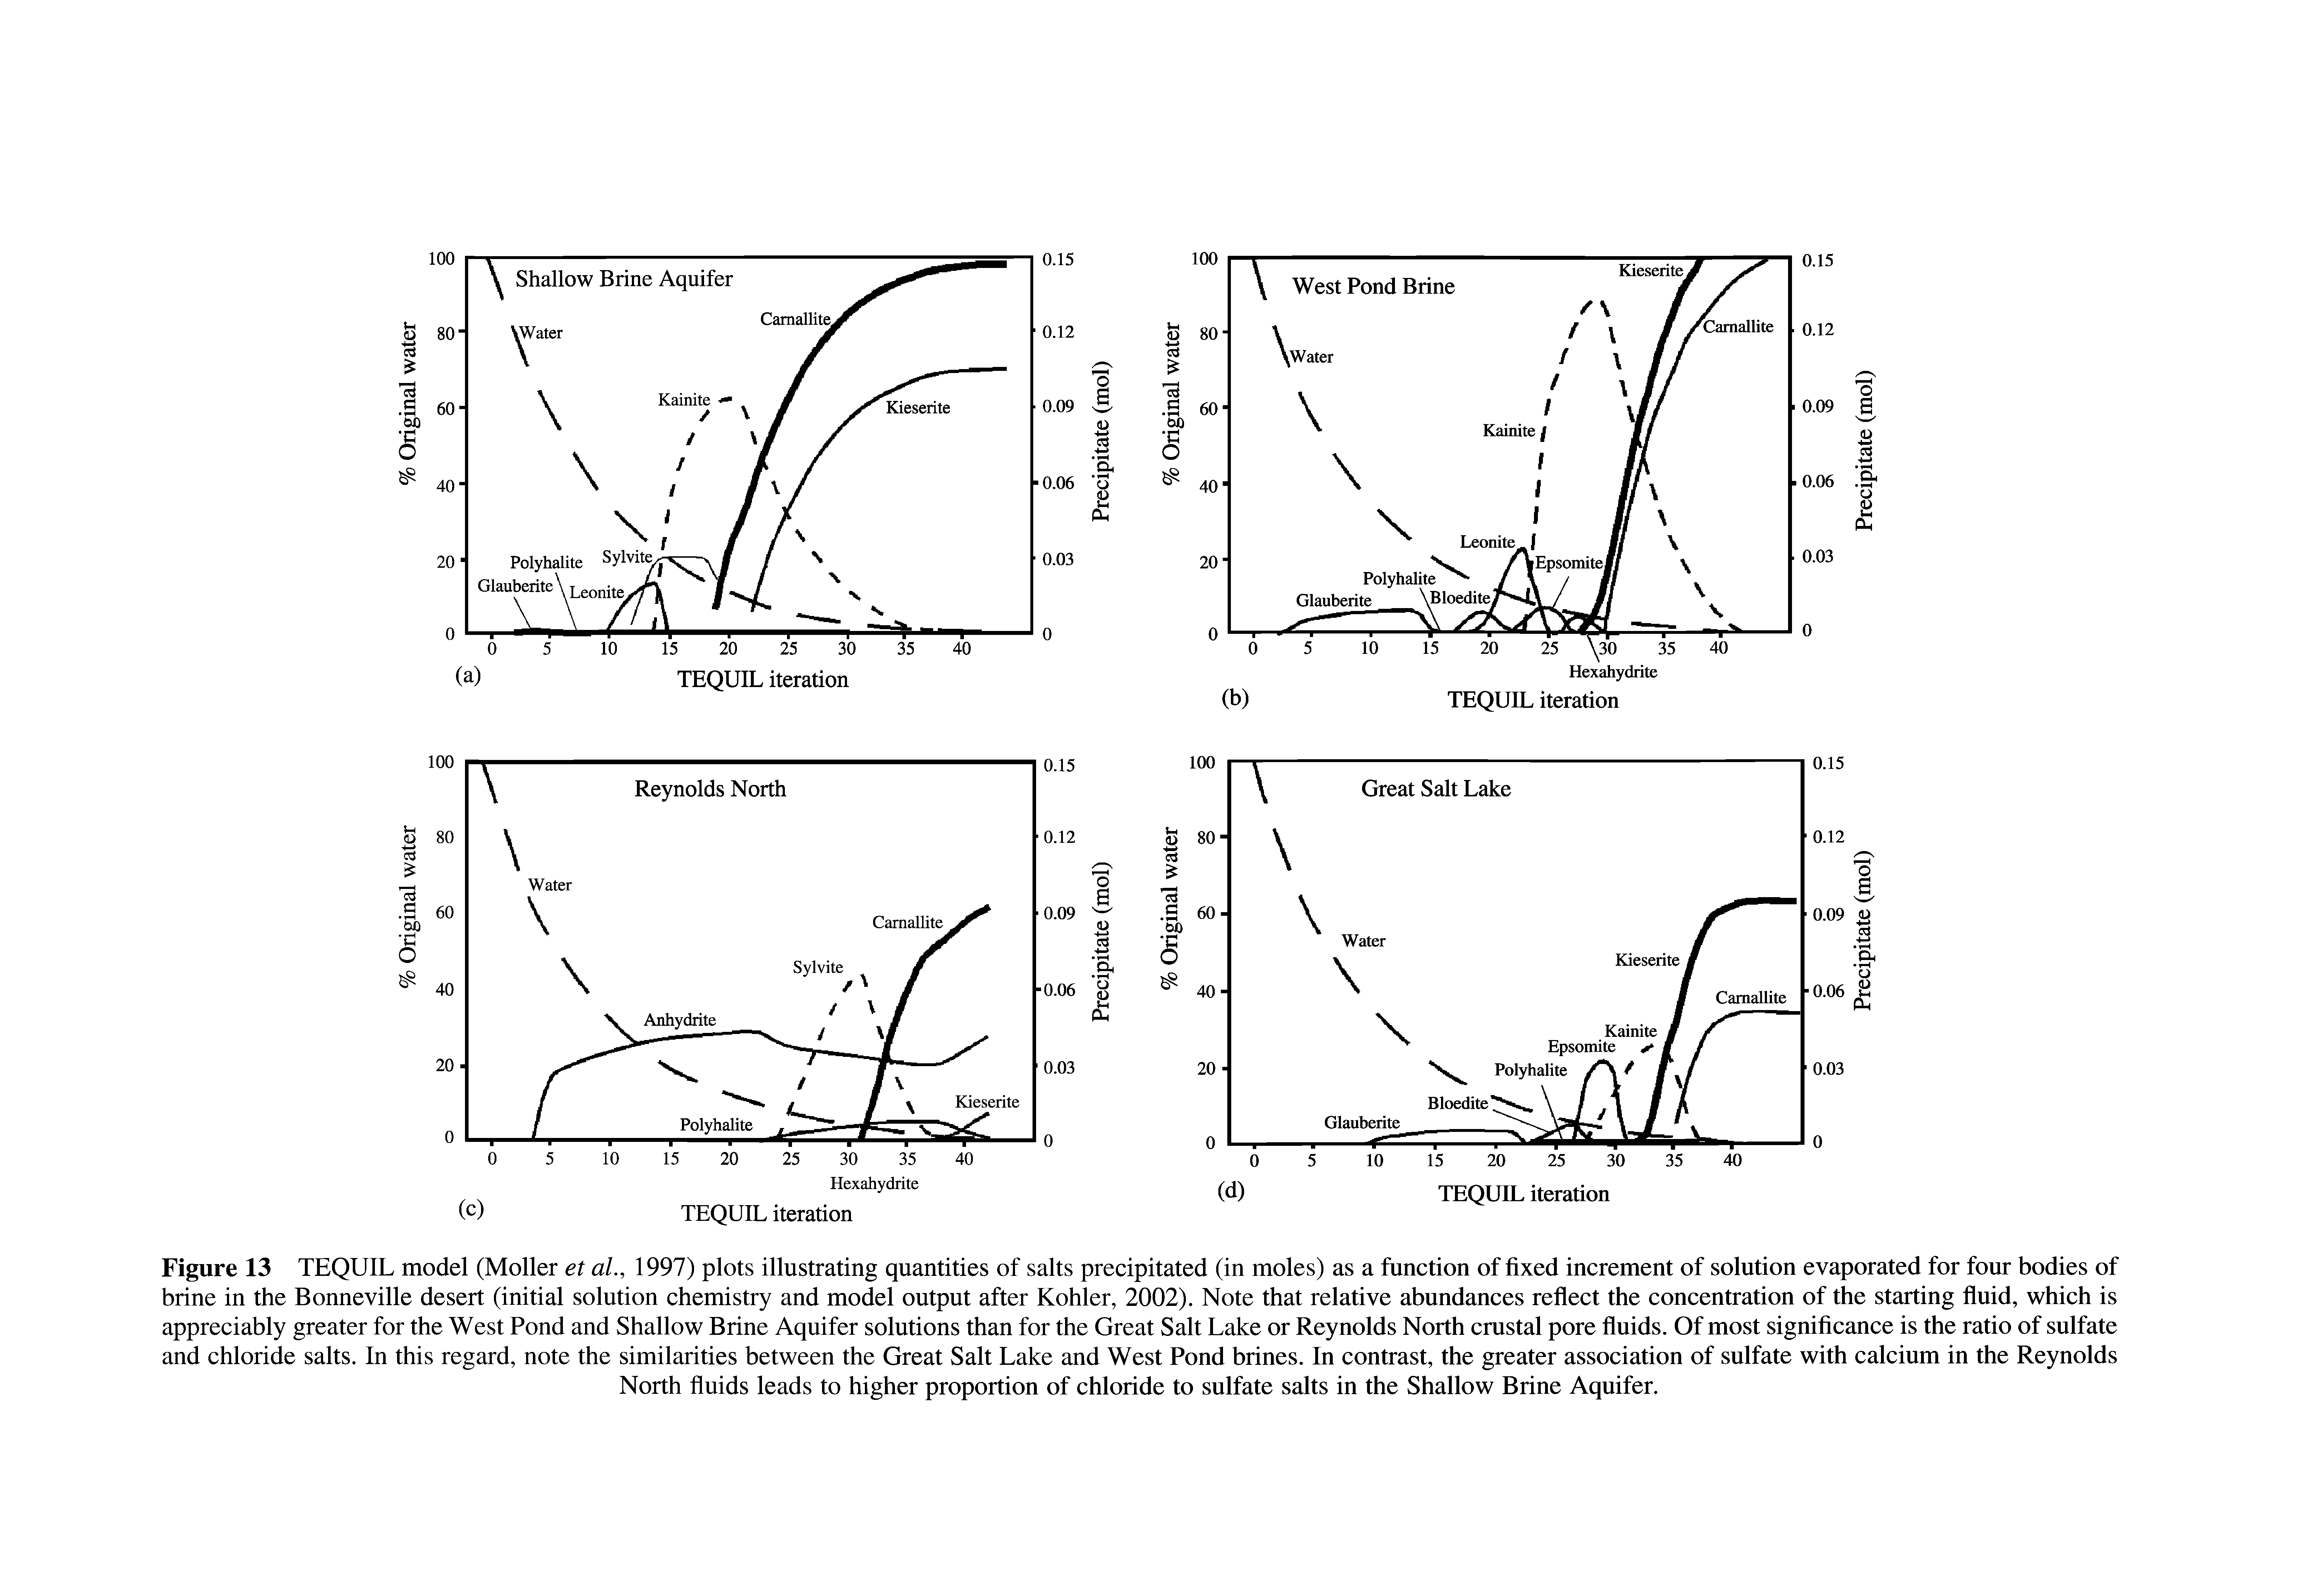 Figure 13 TEQUIL model (Moller et aL, 1997) plots illustrating quantities of salts precipitated (in moles) as a function of fixed increment of solution evaporated for four bodies of brine in the Bonneville desert (initial solution chemistry and model output after Kohler, 2002). Note that relative abundances reflect the concentration of the starting fluid, which is appreciably greater for the West Pond and Shallow Brine Aquifer solutions than for the Great Salt Lake or Reynolds North crustal pore fluids. Of most significance is the ratio of sulfate and chloride salts. In this regard, note the similarities between the Great Salt Lake and West Pond brines. In contrast, the greater association of sulfate with calcium in the Reynolds...